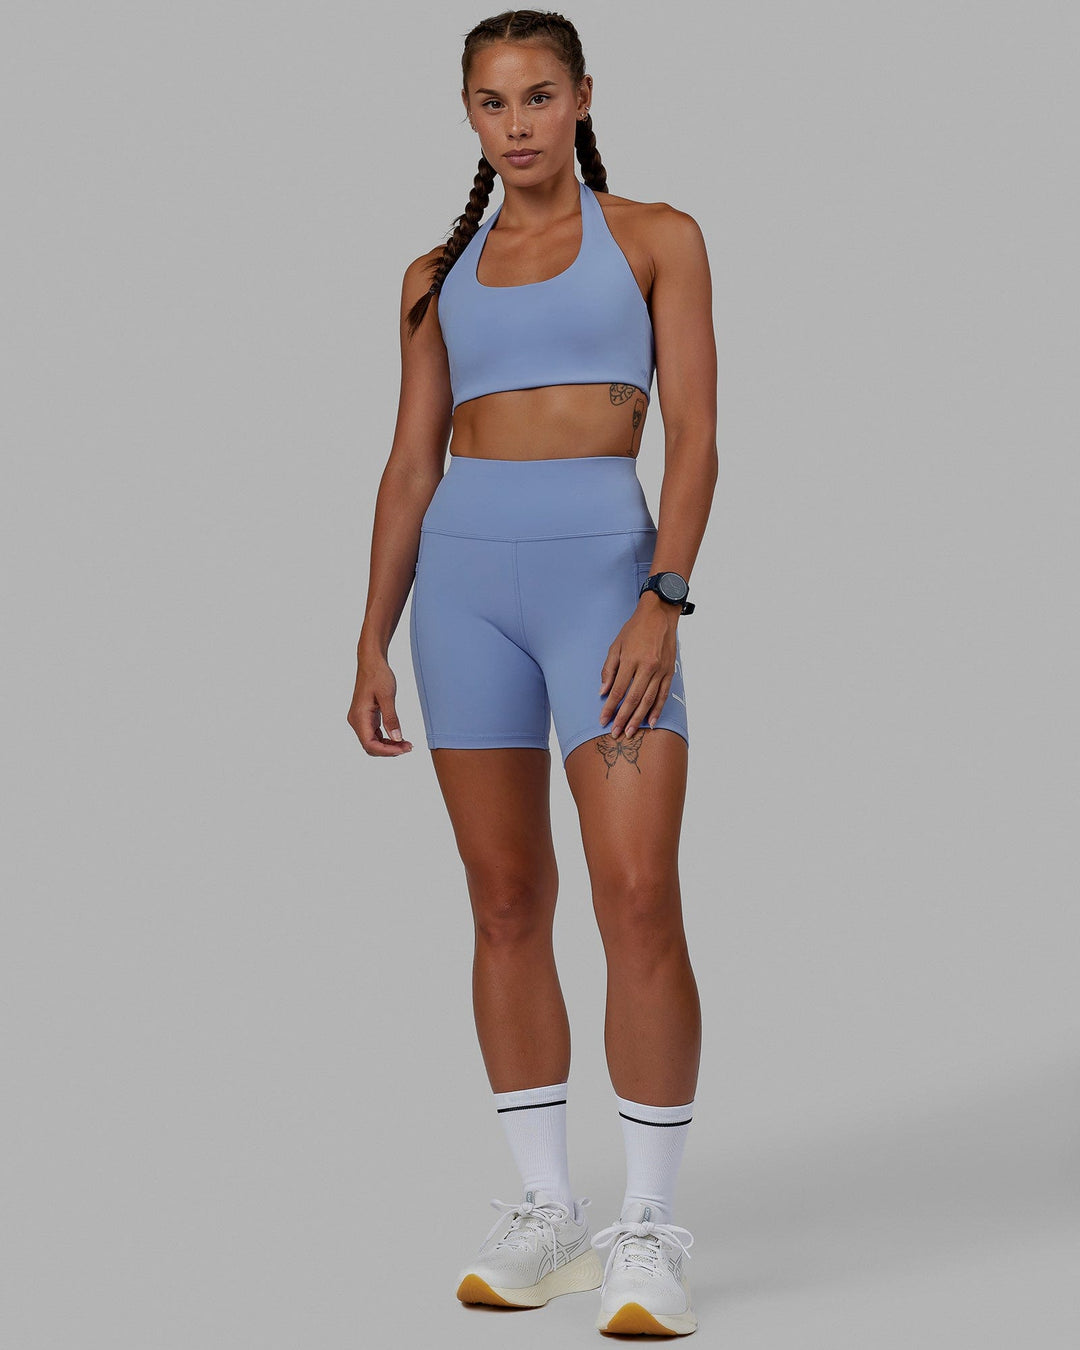 Woman wearing Rep Mid Short Tight - Arctic Blue-White